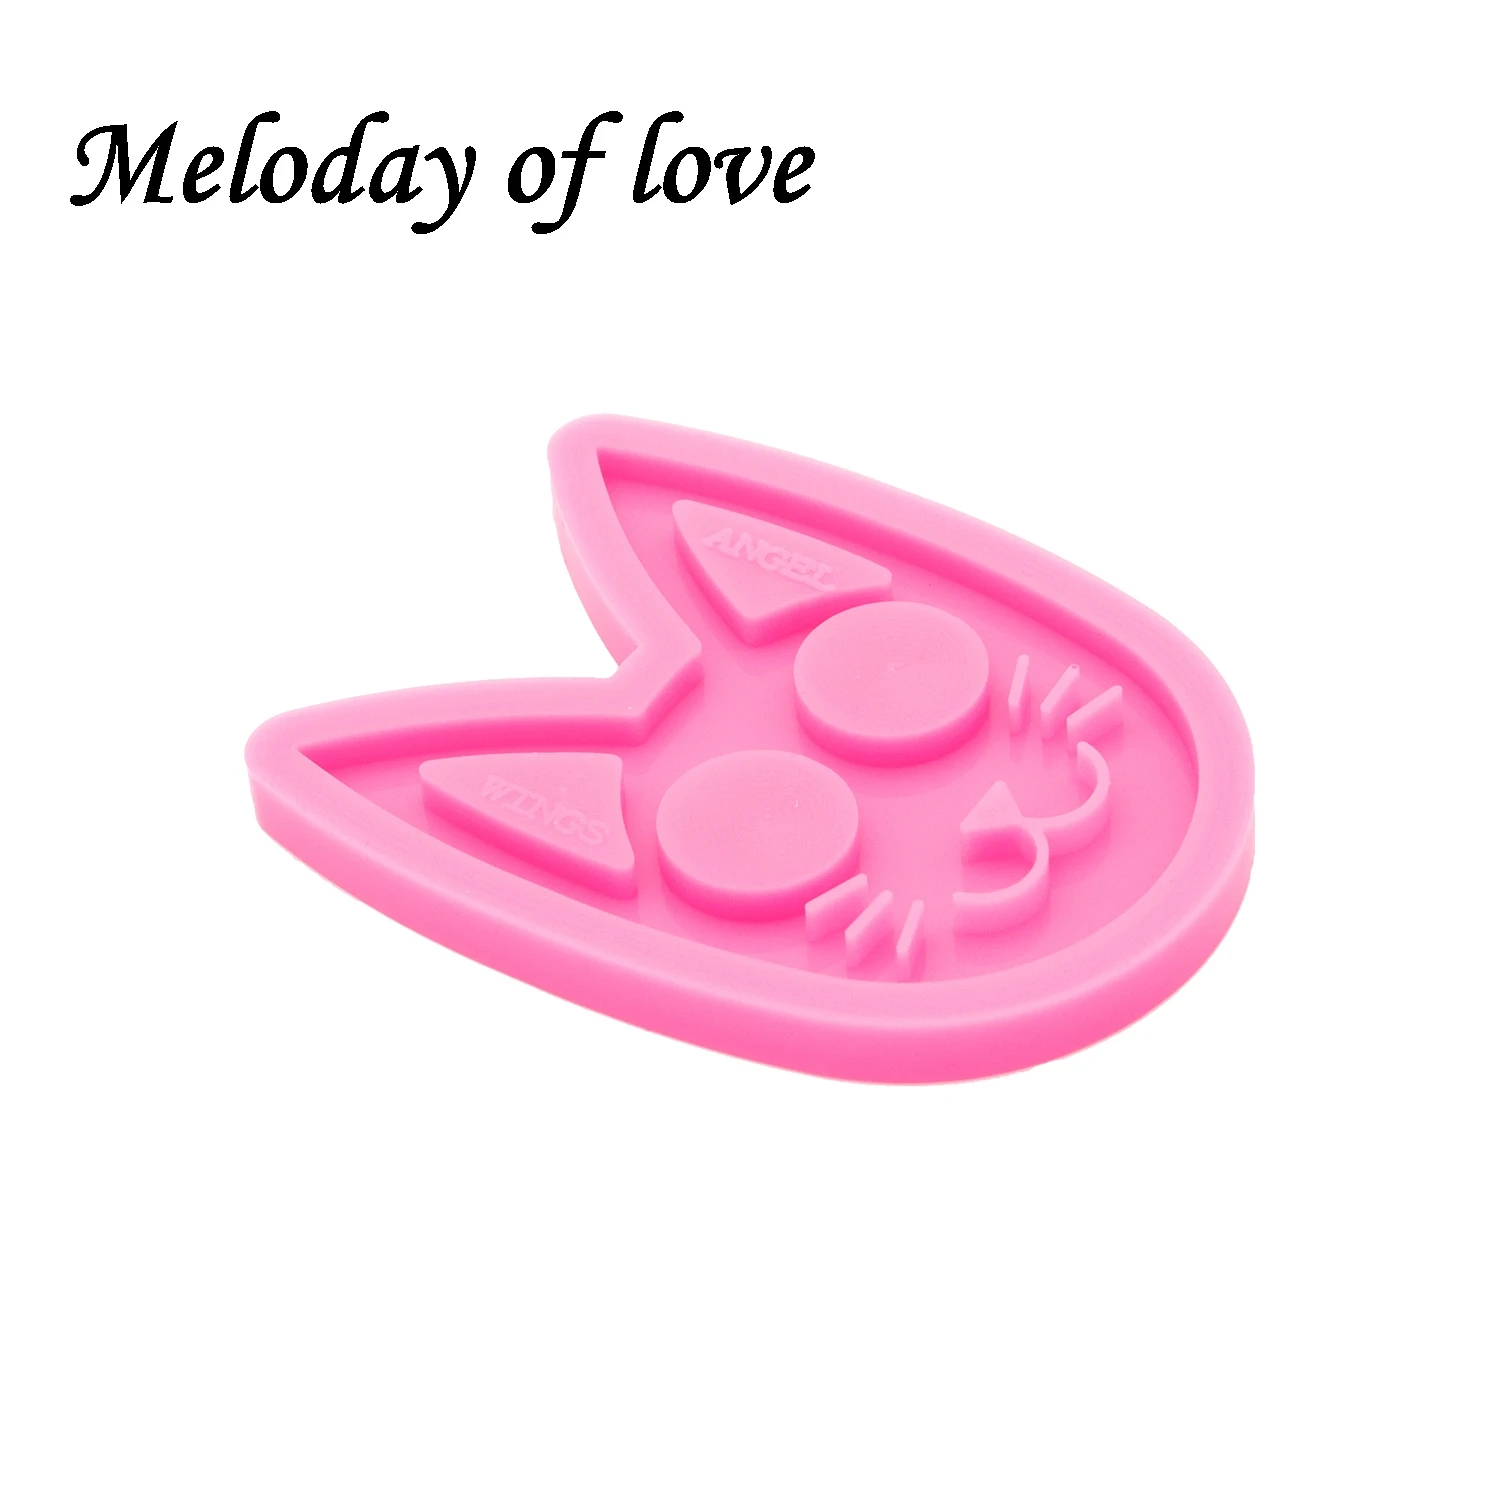 Glossy Cat/Deer/Whale/Rabbit/Paw/Skull Defense Keychain Mold Silicone Resin Mould DIY Epoxy Crafting DY0609 images - 6